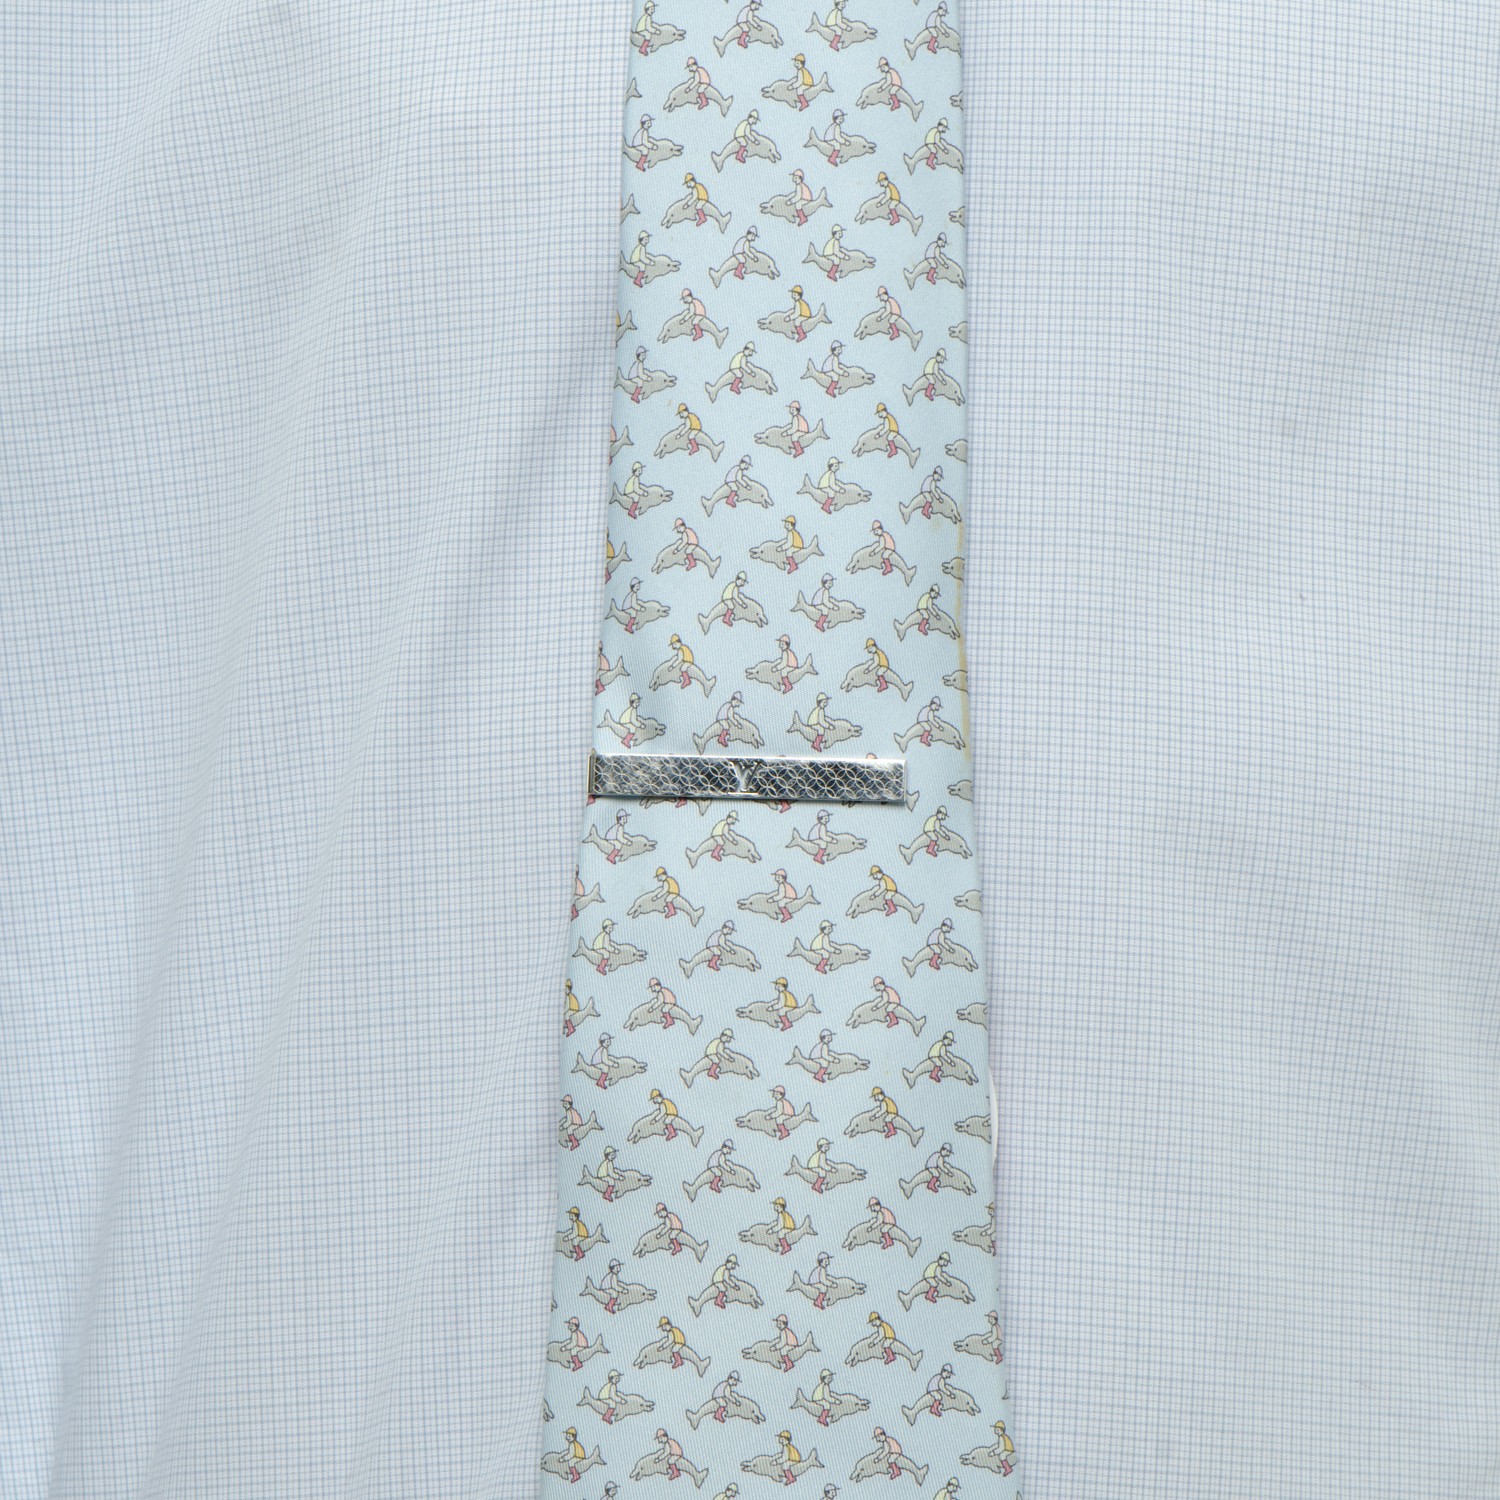 VUITTON Champs Elysees Tie Pin 179808 FASHIONPHILE